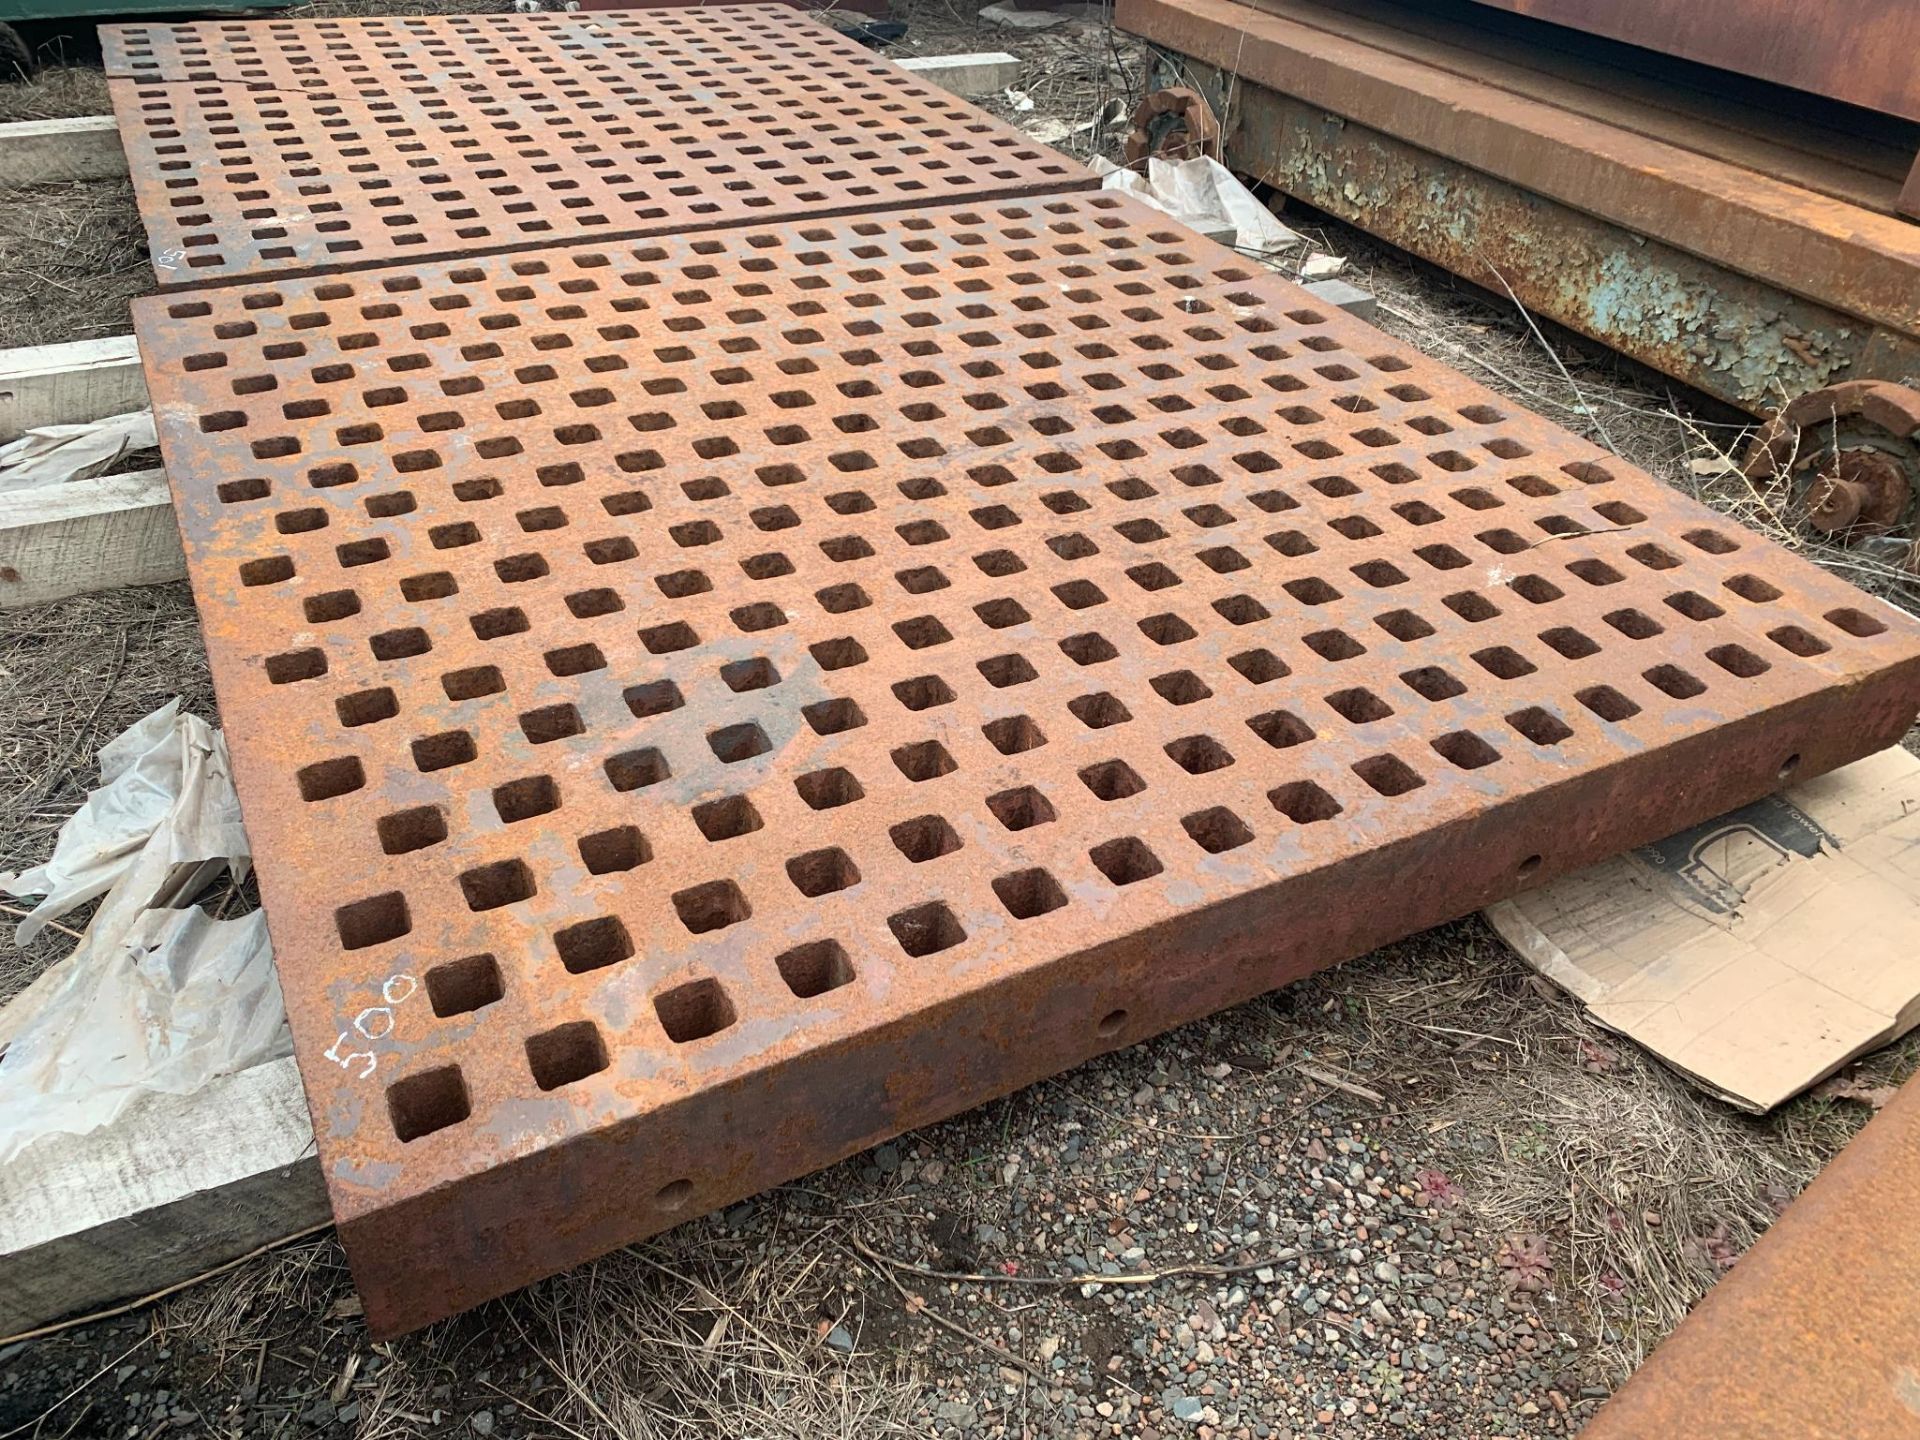 Acorn Style Welding Platen. Approx 61.5" x 61.5" x 5.25" deep with 2" square holes. Note: Small crac - Image 31 of 33